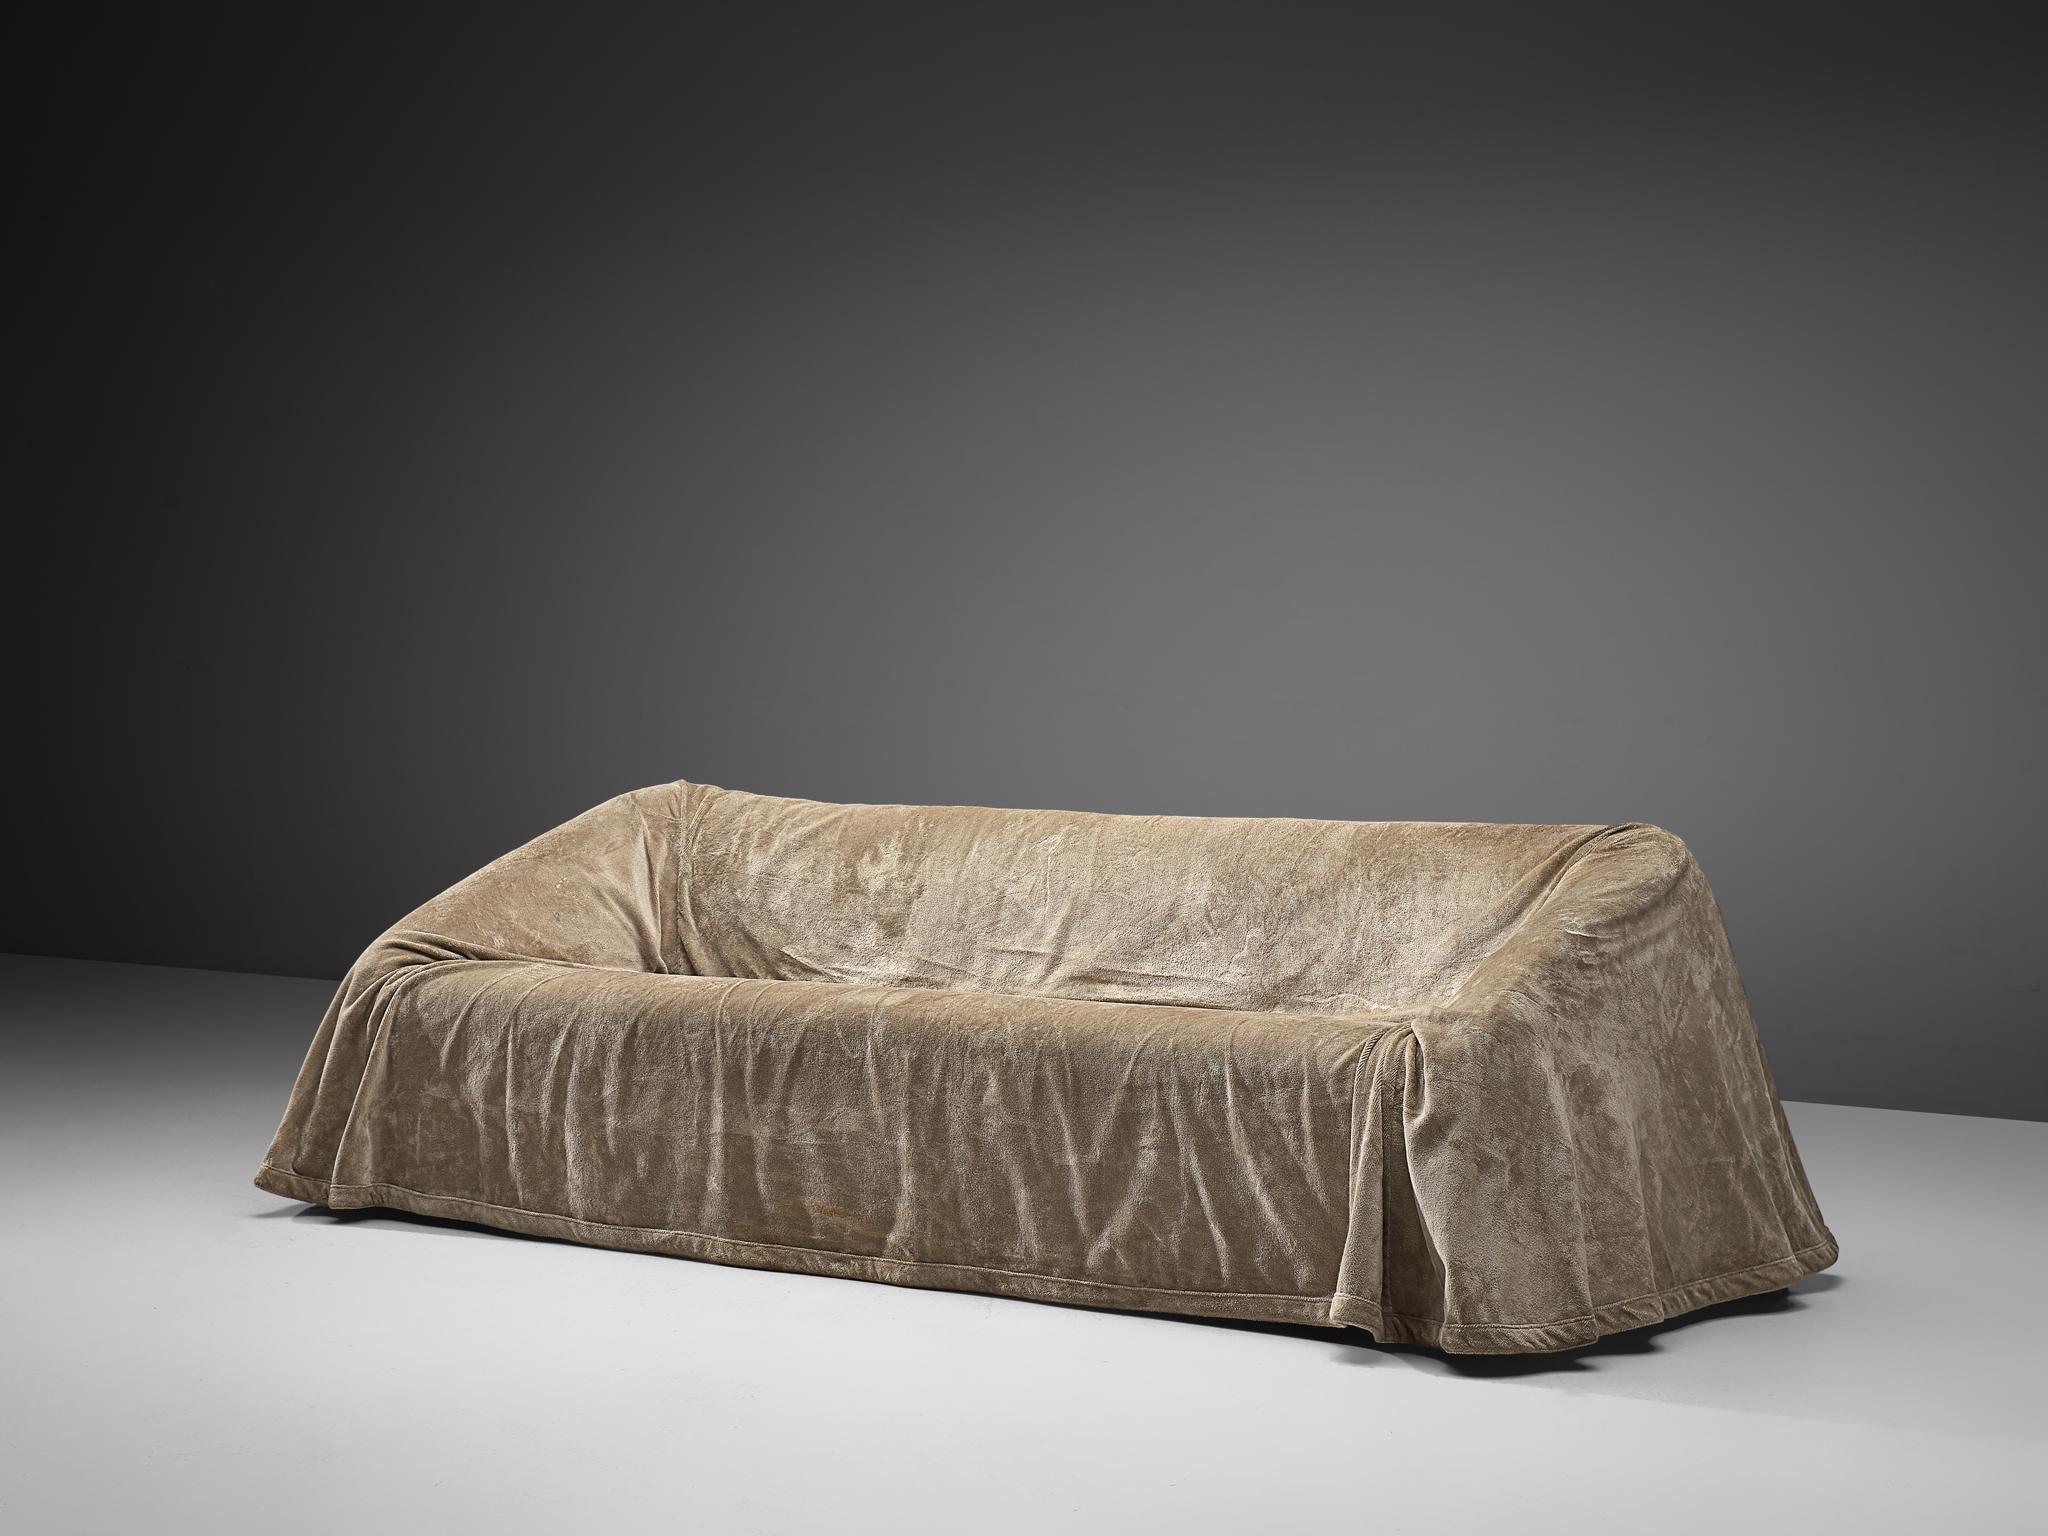 Kazuhide Takahama for Simon, 'Paradisoterrestre Mantilla' Sofa 225, velvet, Italy, 1974.

Stunning and serene Mantilla sofa by Kazuhide Takahama. The Mantilla's name comes from the mantle which covers it, thus distinguishing its look. The idea comes